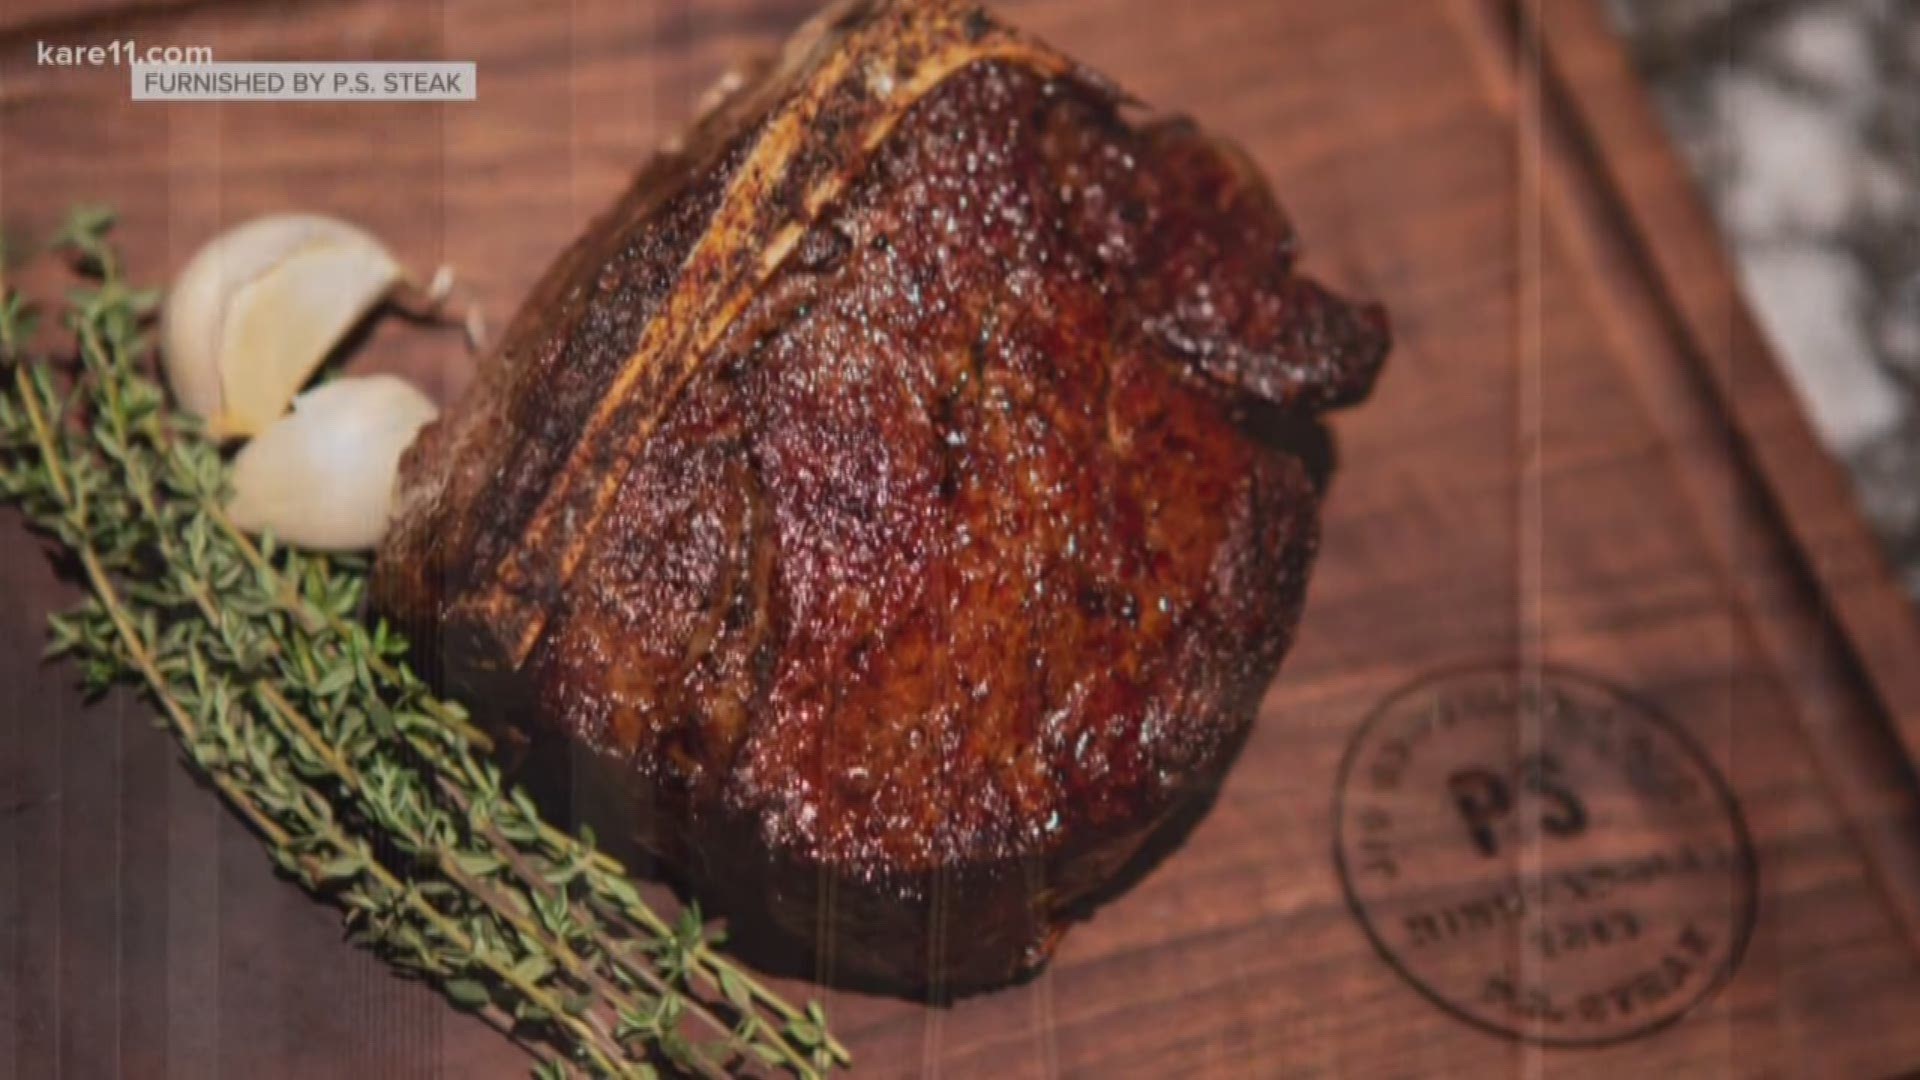 Executive Chef Mike DeCamp stopped by to cook up P.S. Steak's Flat Iron Steak in the KARE 11 Kitchen.